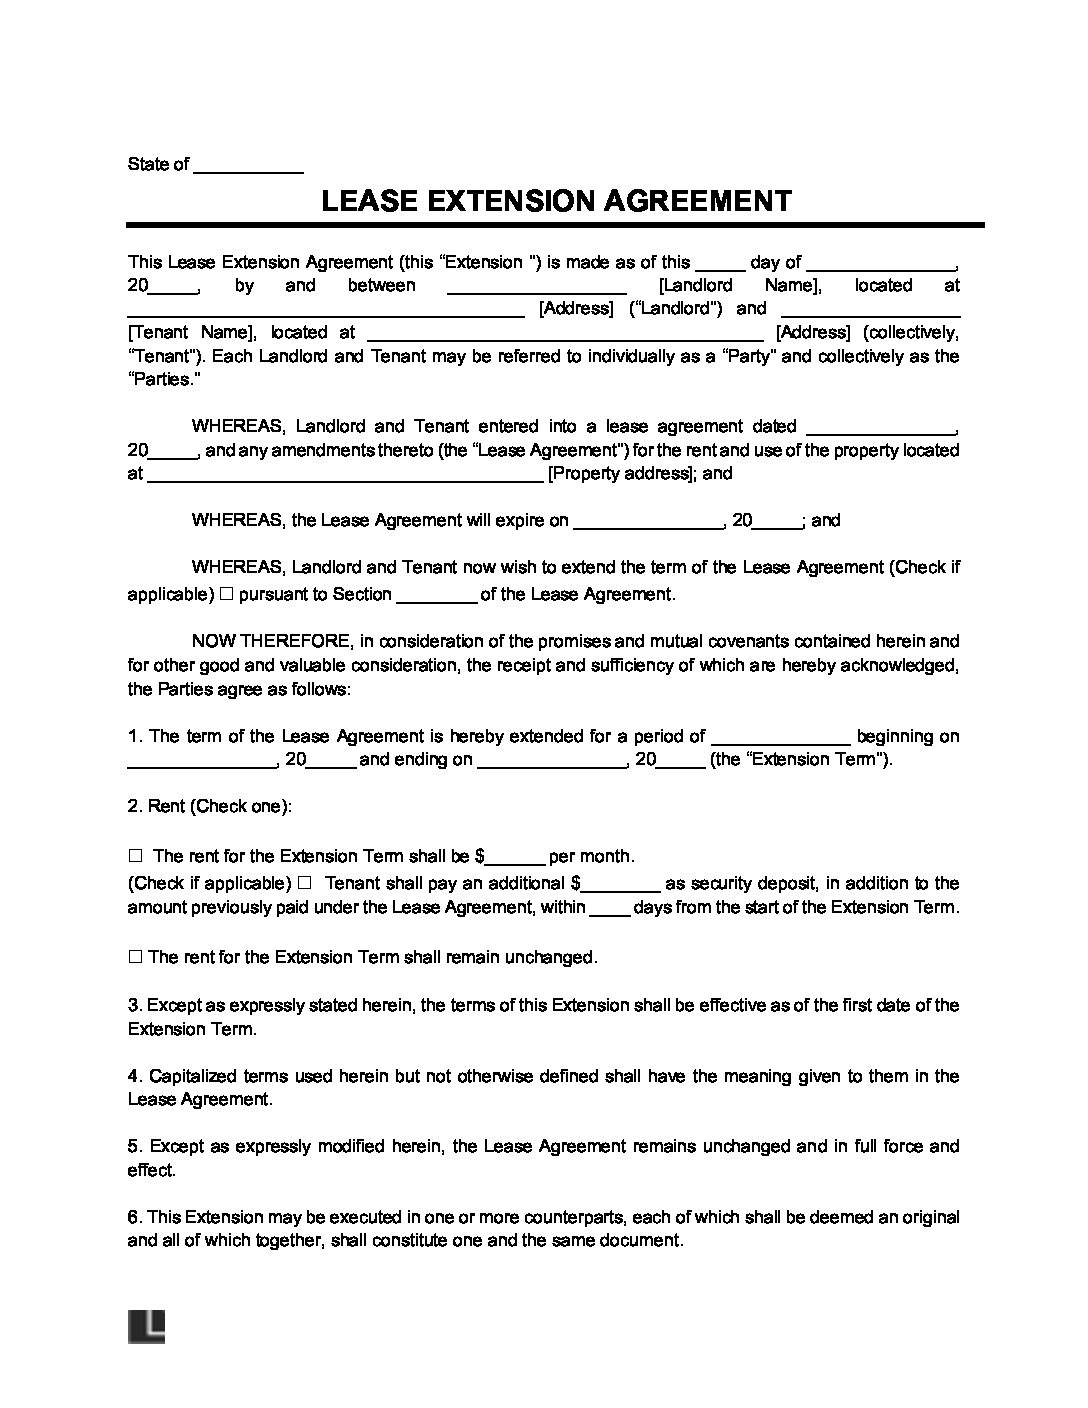 free-lease-extension-agreement-pdf-word